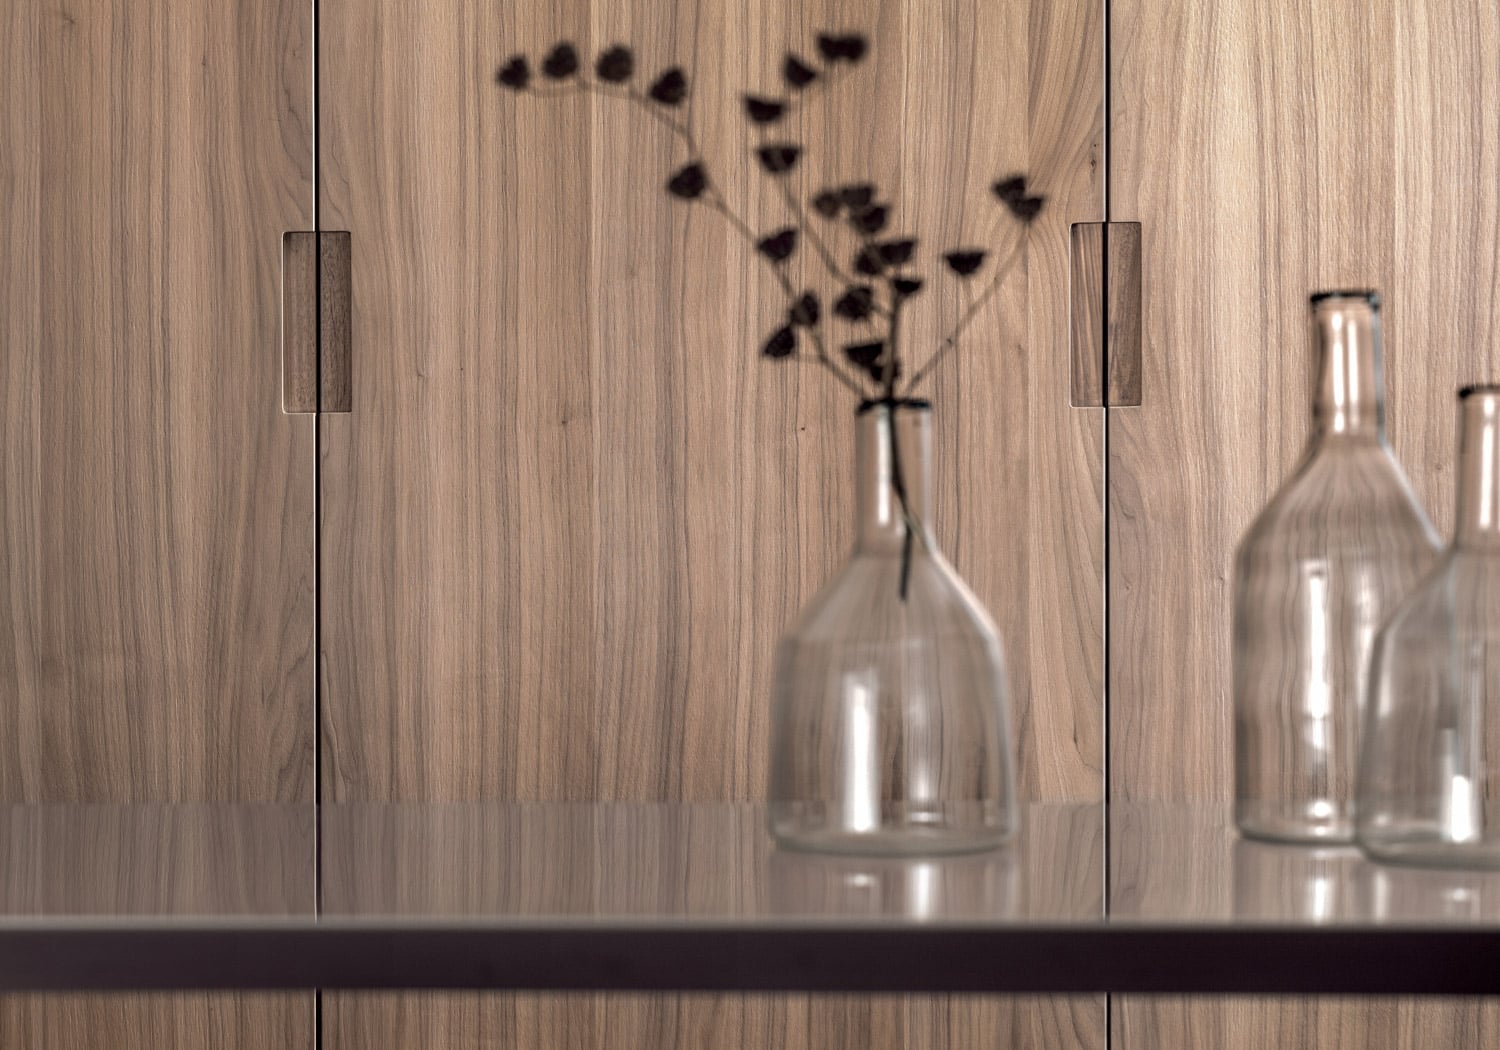 The Bleached Walnut finish used on the kitchen’s tall units offers an elegant, dynamic grain that plays gently with the light. The handles in the same finish guarantee continuity while providing an interesting detail. 